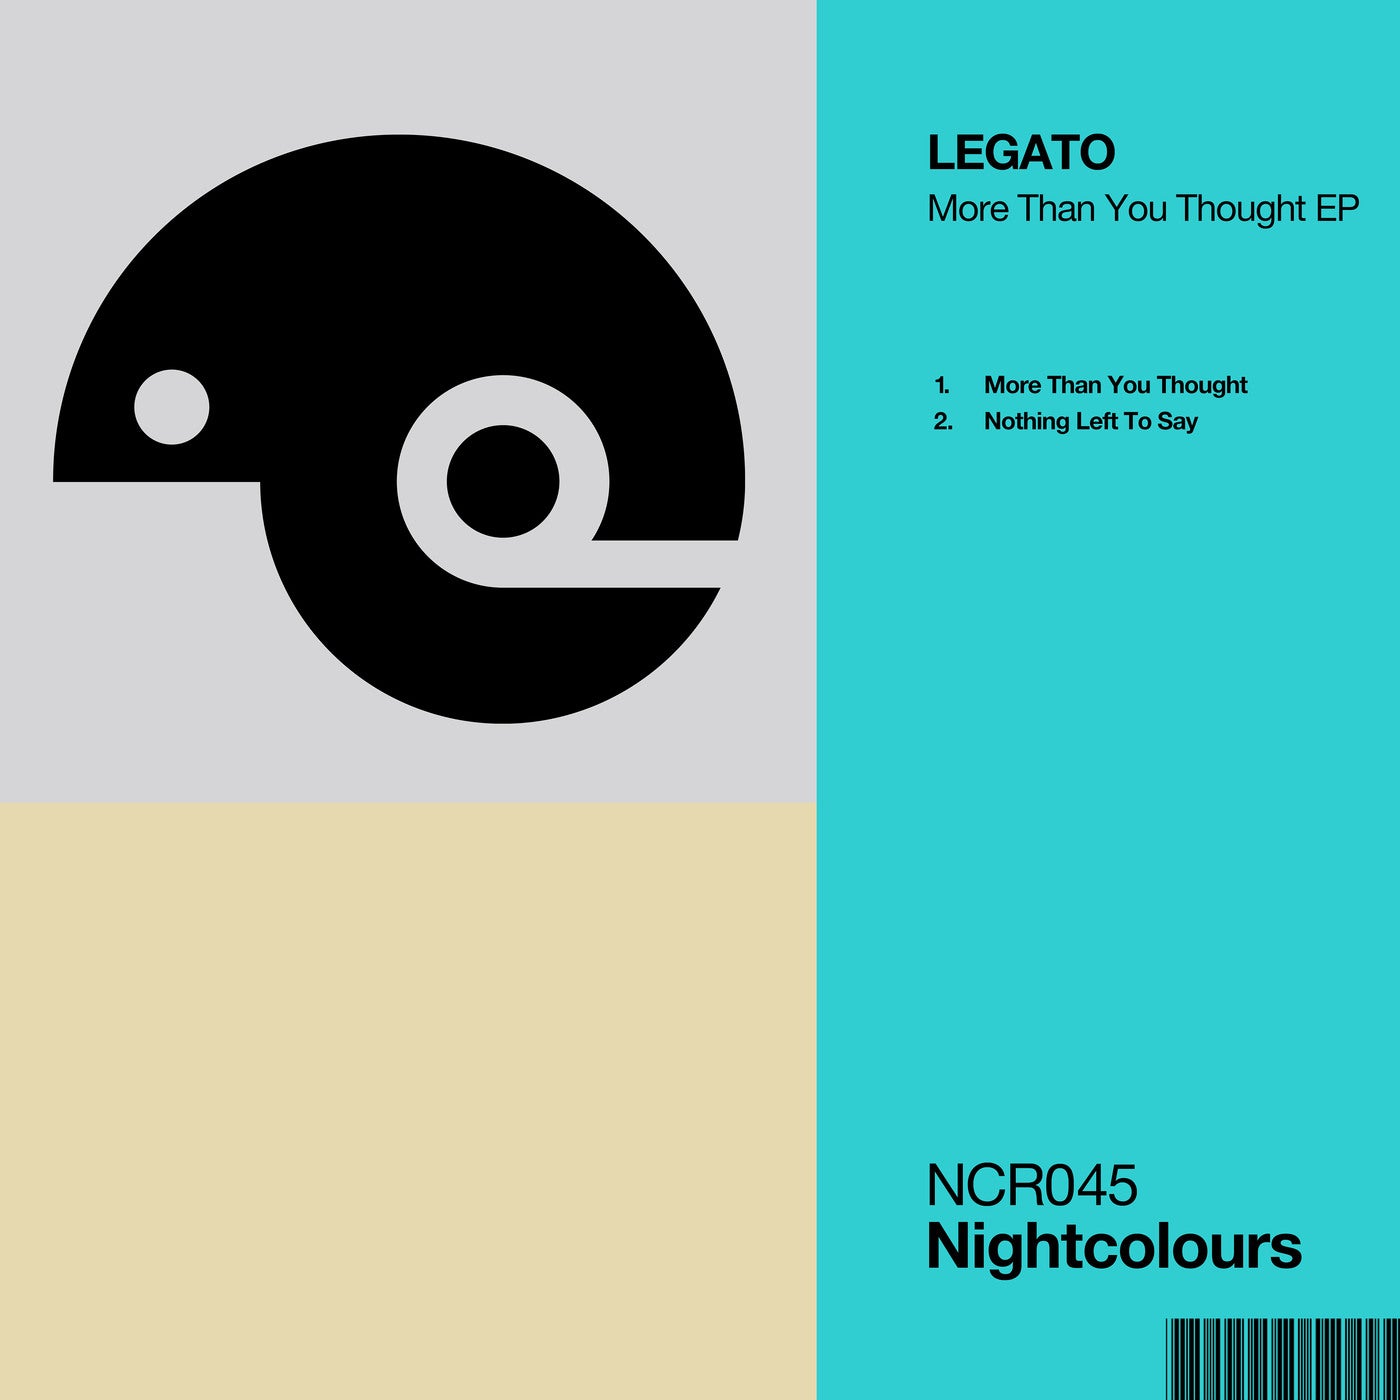 LEGATO (UK) – More Than You Thought EP [NCR045]